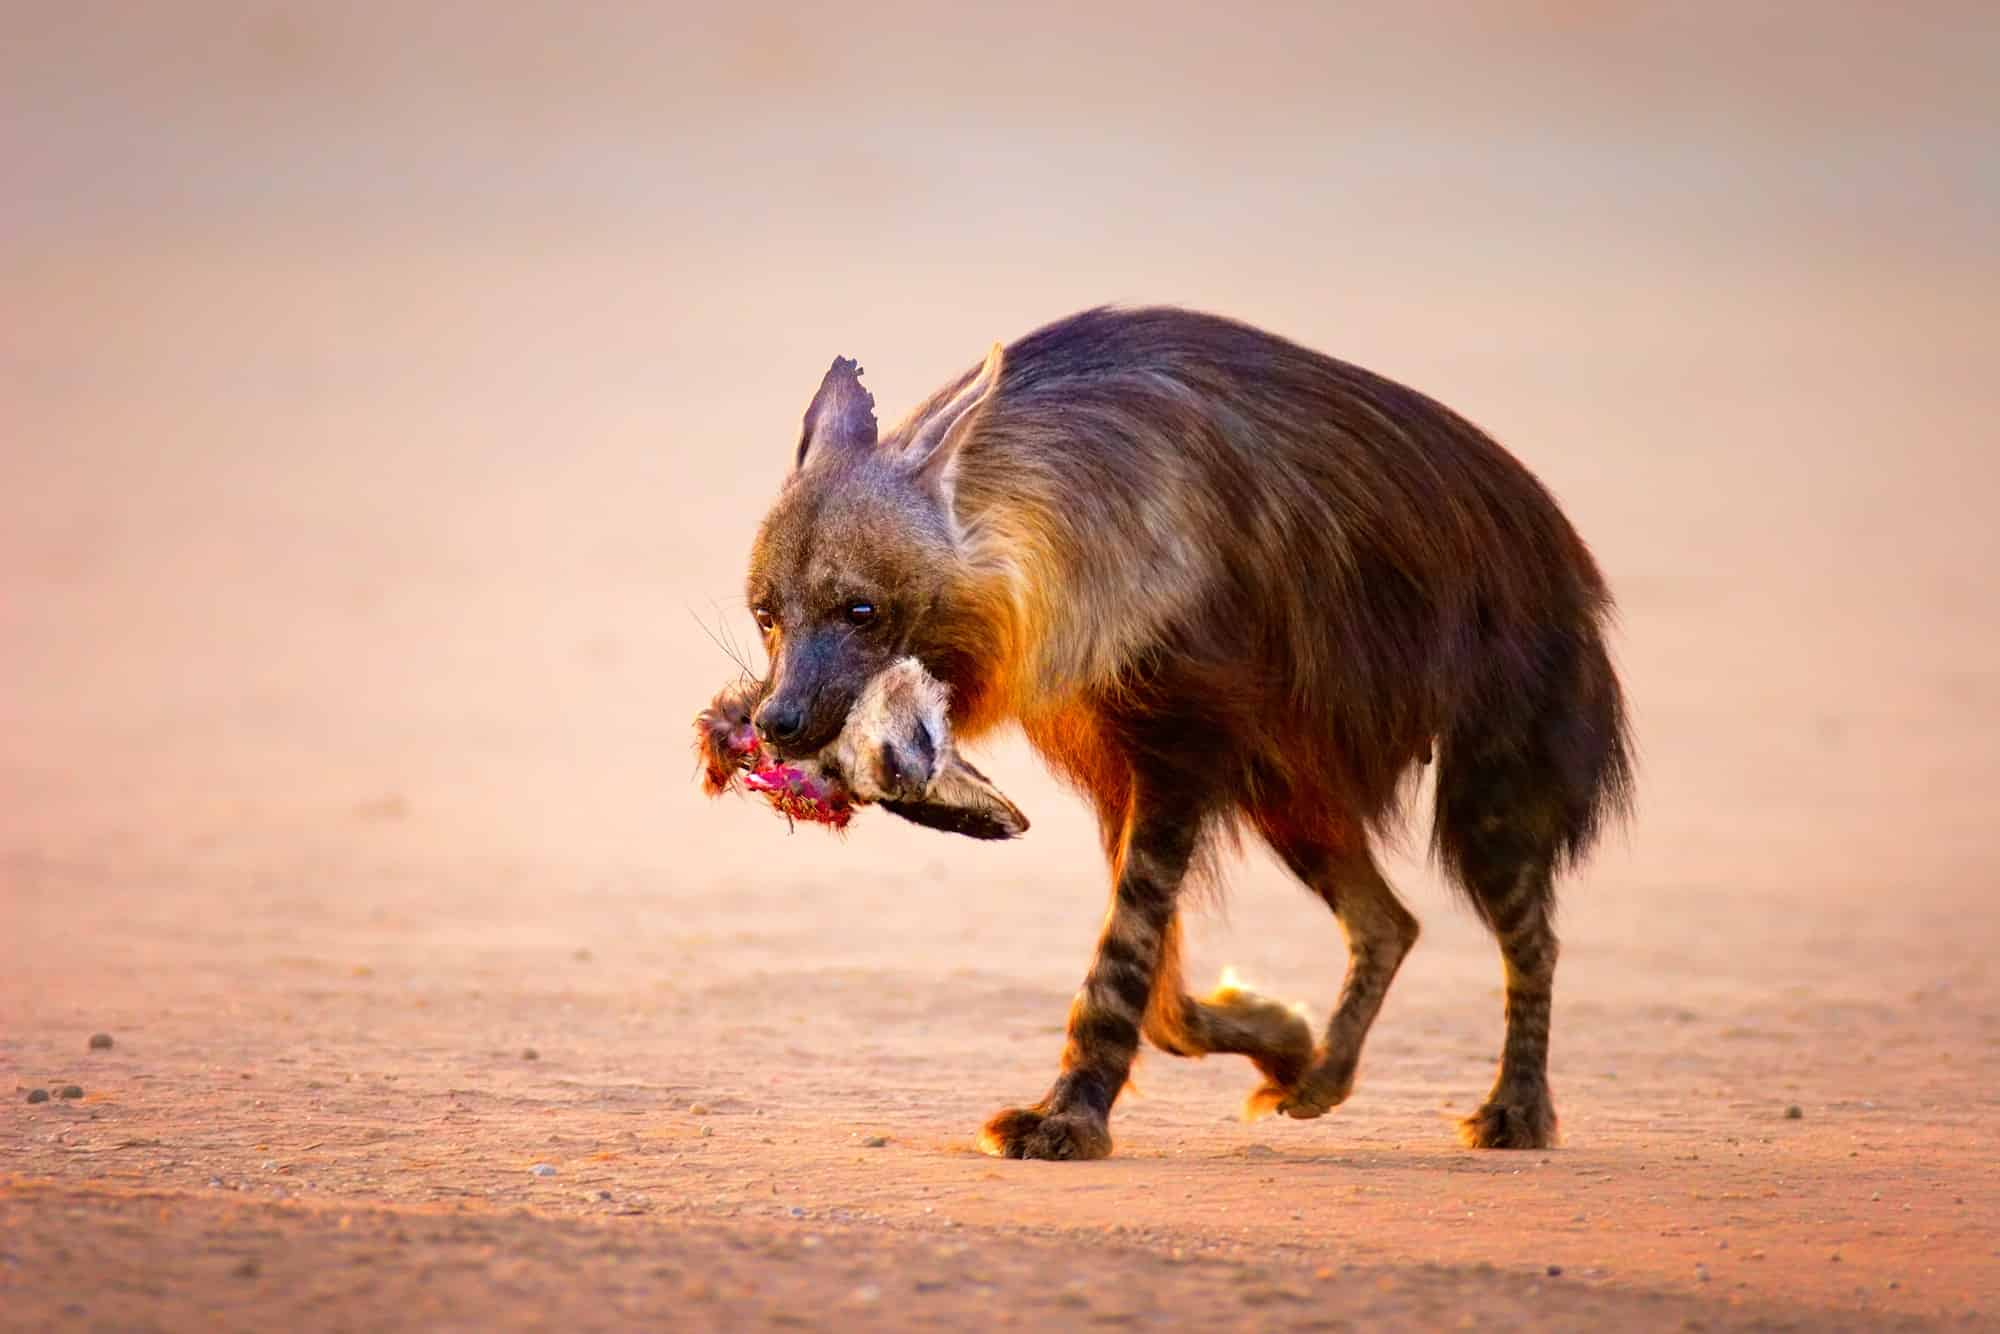 Brown hyena (hyaena brunnea) carrying a dead seal pup after it killed it, at a Namibian seal colony on the Skeleton Coast in Namibia.